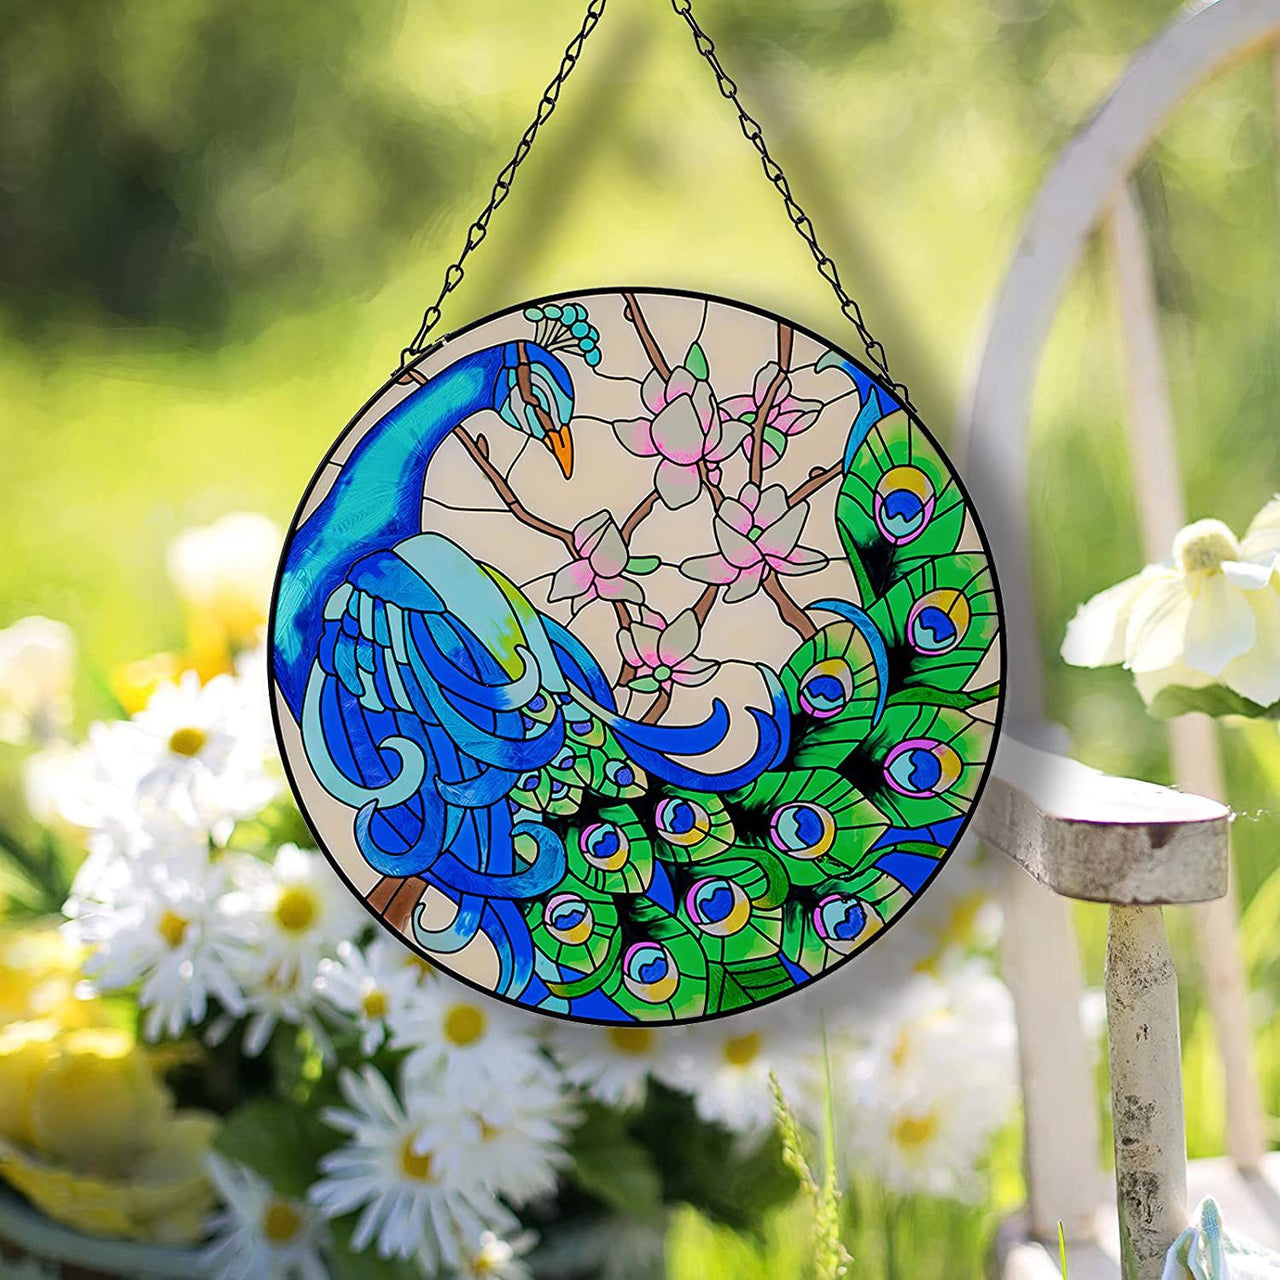 Stained Glass Peacock Window Decoration Round Color Peacock Ornament